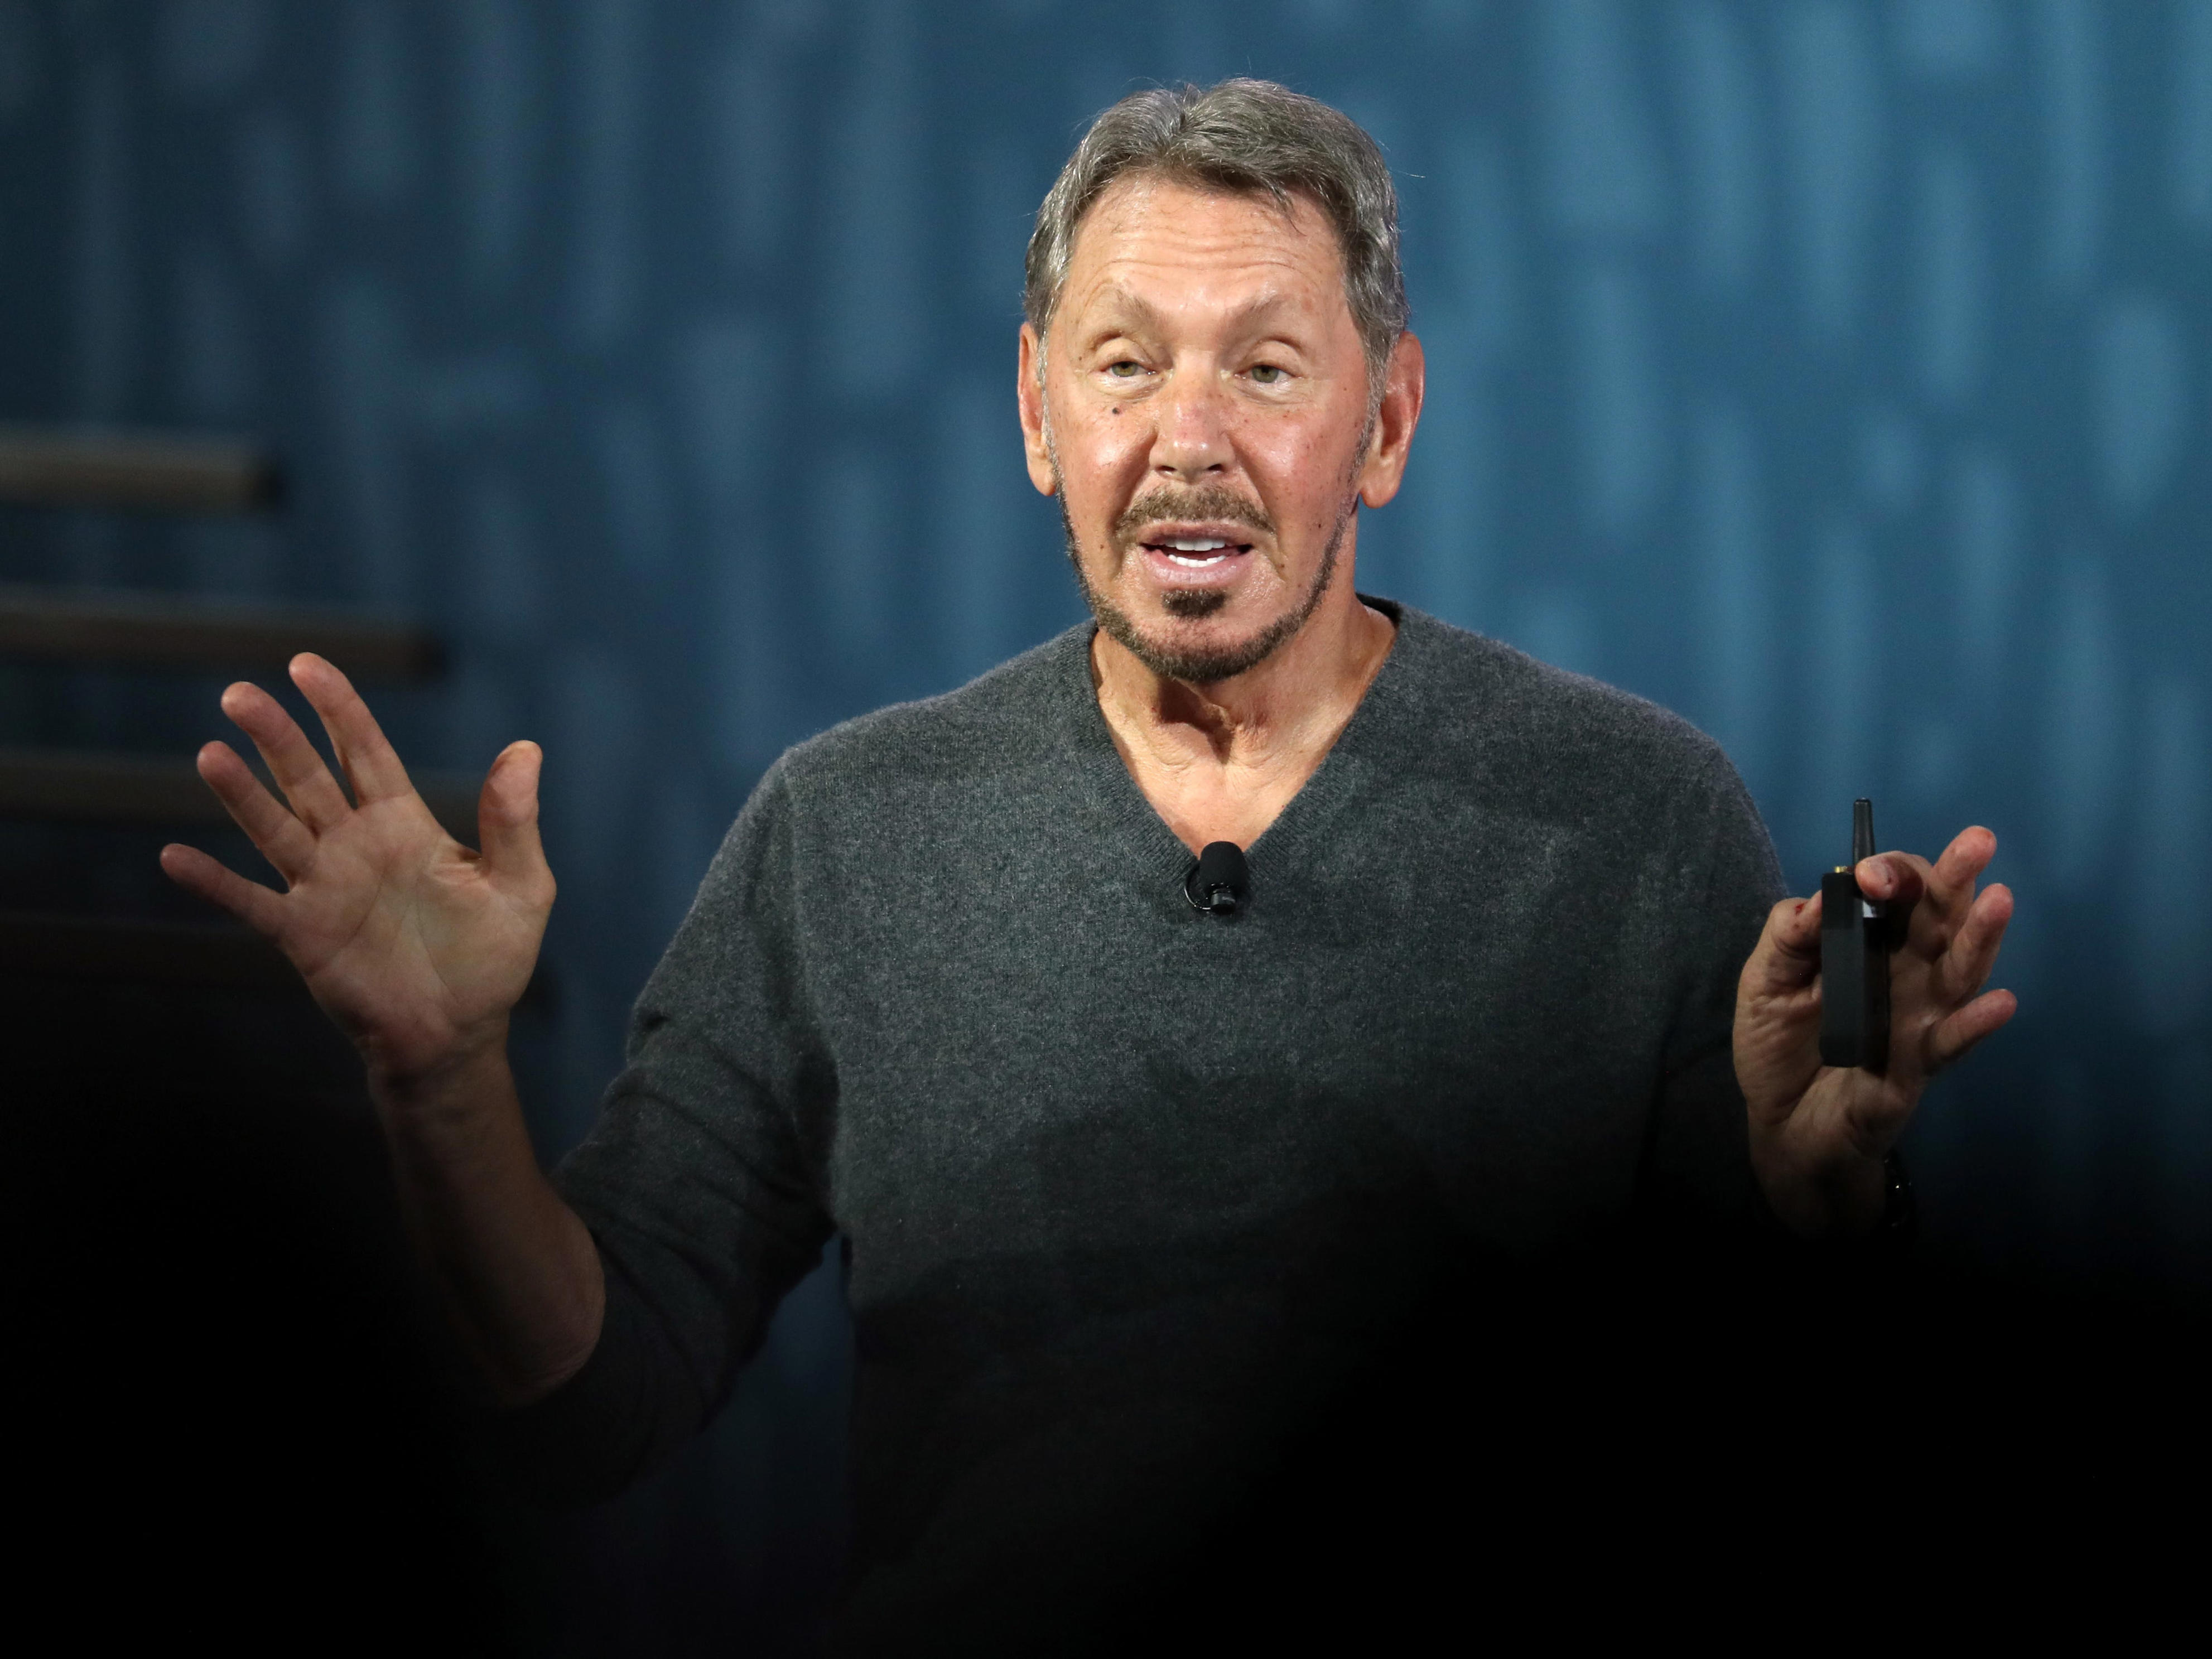 <p>Ellison said publicly that <a href="https://www.businessinsider.com/larry-ellison-oracle-trump-support-2020-4">he supported Trump</a> and wants him to do well, and hosted a Trump fundraiser at his Rancho Mirage home in February, though <a href="https://www.forbes.com/sites/angelauyeung/2020/04/01/exclusive-larry-ellison-reveals-his-big-data-battle-plan-to-fight-coronavirus-in-partnership-with-trump-white-house/#7a5a894e31d3">he did not attend</a>. The fundraiser caused an outcry among Oracle employees, who <a href="https://www.change.org/p/larry-ellison-uphold-company-ethics">started a petition</a> asking senior Oracle leadership to stand up to Ellison.</p><p>Catz, the CEO of Oracle, also had close ties to the Trump administration, having served on Trump's transition team. </p><p>Ellison and Trump remained close during Trump's time in office and reportedly spoke on the phone about possible coronavirus treatments. Trump also <a href="https://www.businessinsider.com/look-inside-president-trump-and-larry-ellisons-relationship-2020-8">supported Oracle's bid to buy TikTok</a>, calling Oracle a "great company."  </p>